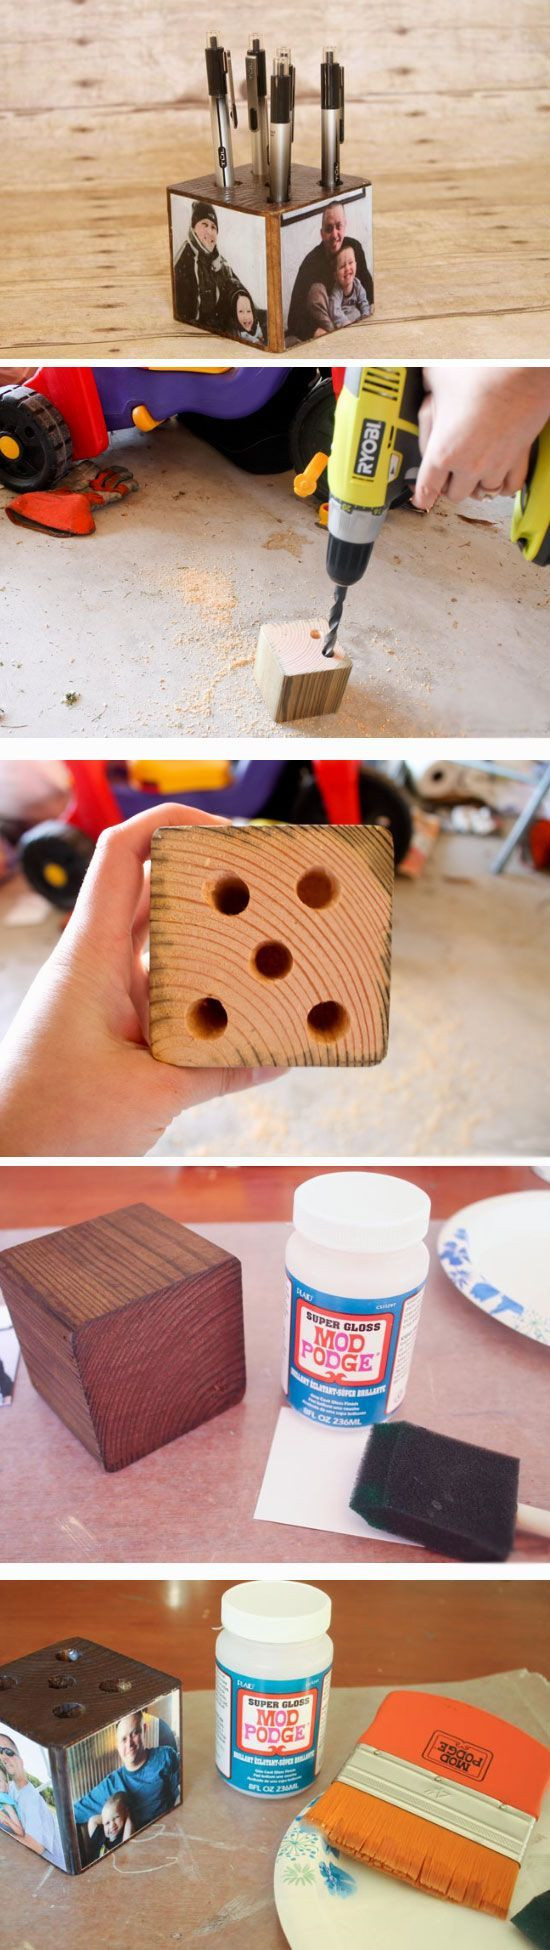 DIY Gifts For Dads Christmas
 Best 25 Gifts For Dad ideas on Pinterest